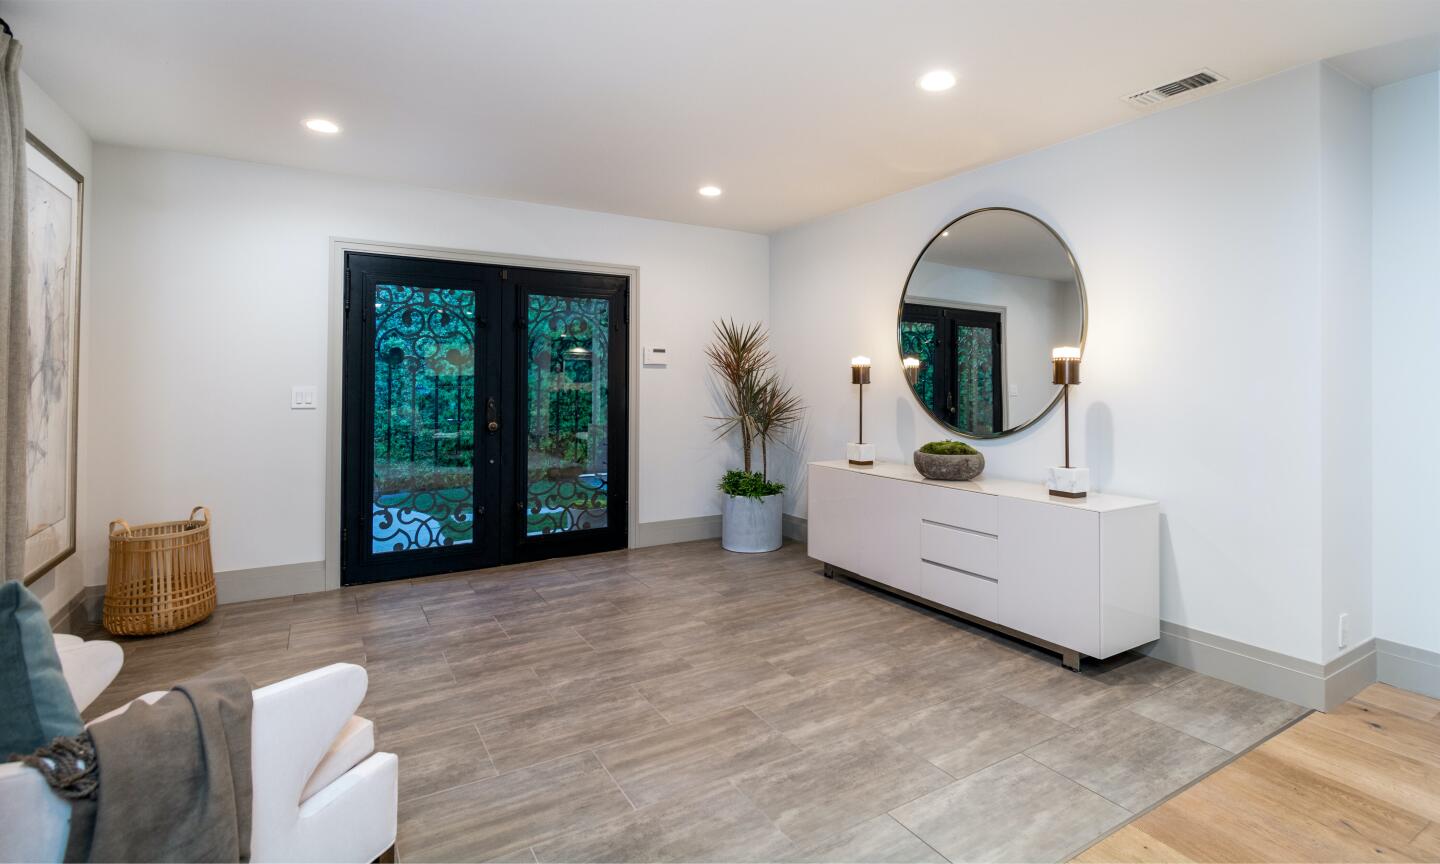 The entry with glass doors, a mirror and side cabinet.